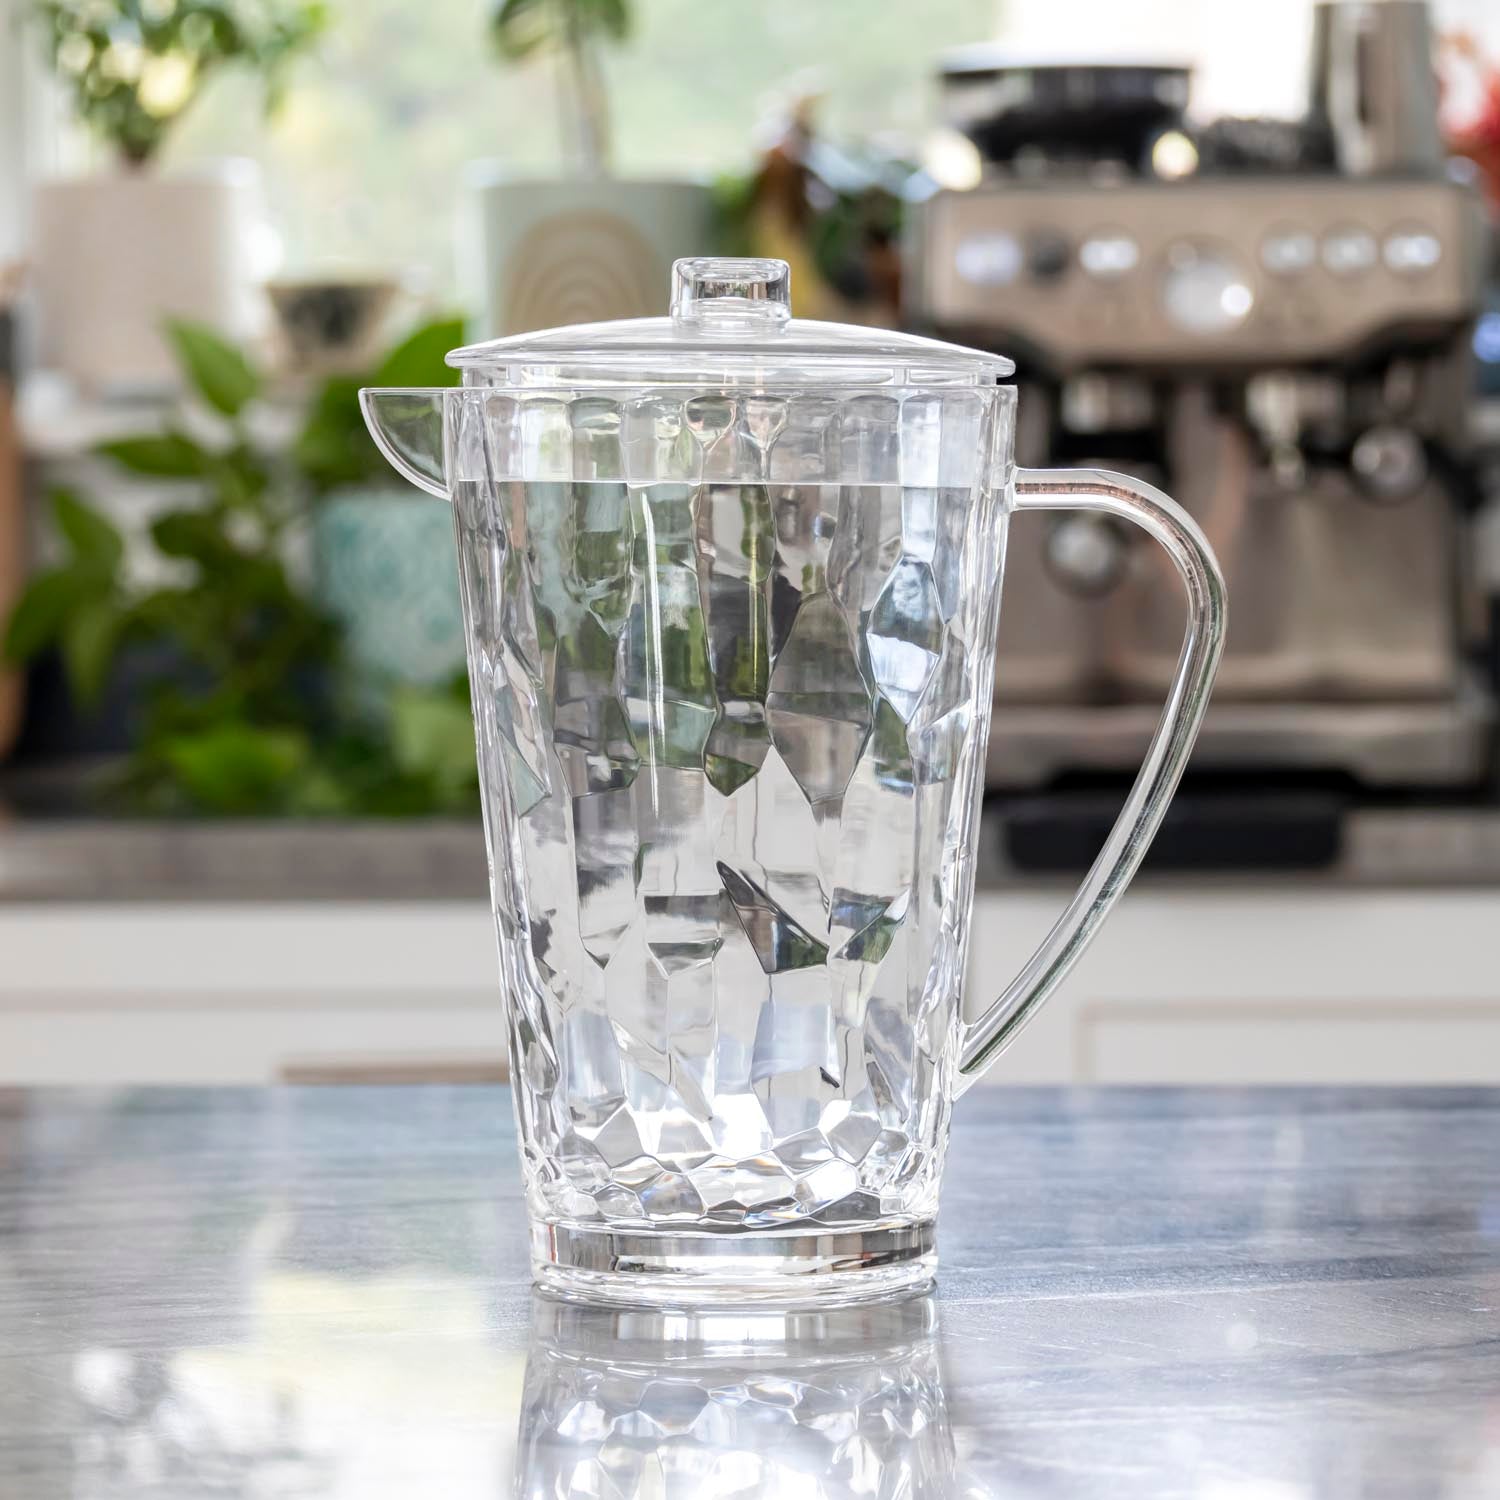 Clear, 64-ounce acrylic pitcher from the Merritt Designs Cascade collection on a kitchen counter